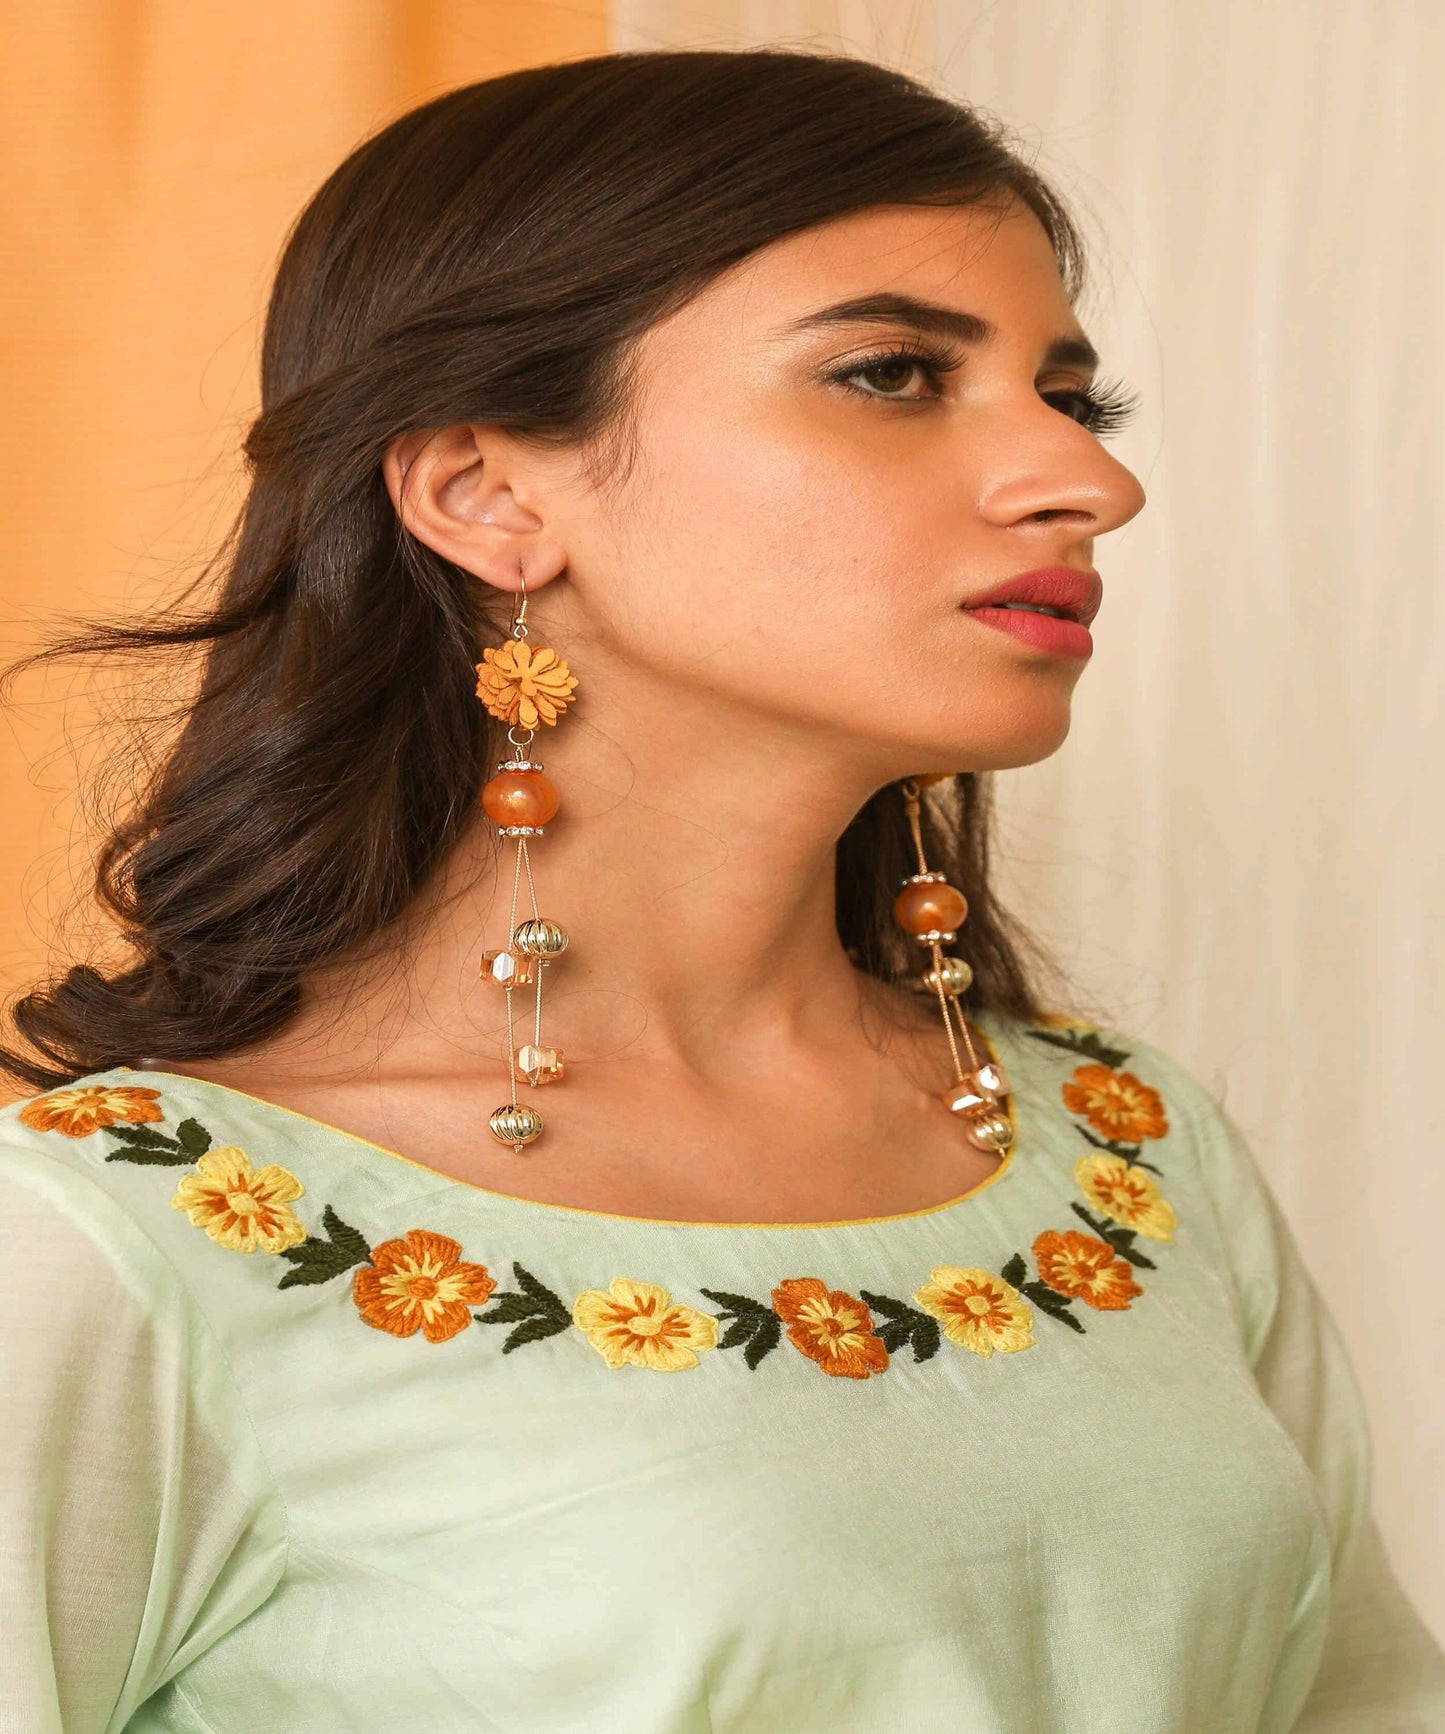 Indian Petals Floral Design with Big Stones Gold Artificial Fashion Dangler Jhumka Earrings for Girls Women - Indian Petals